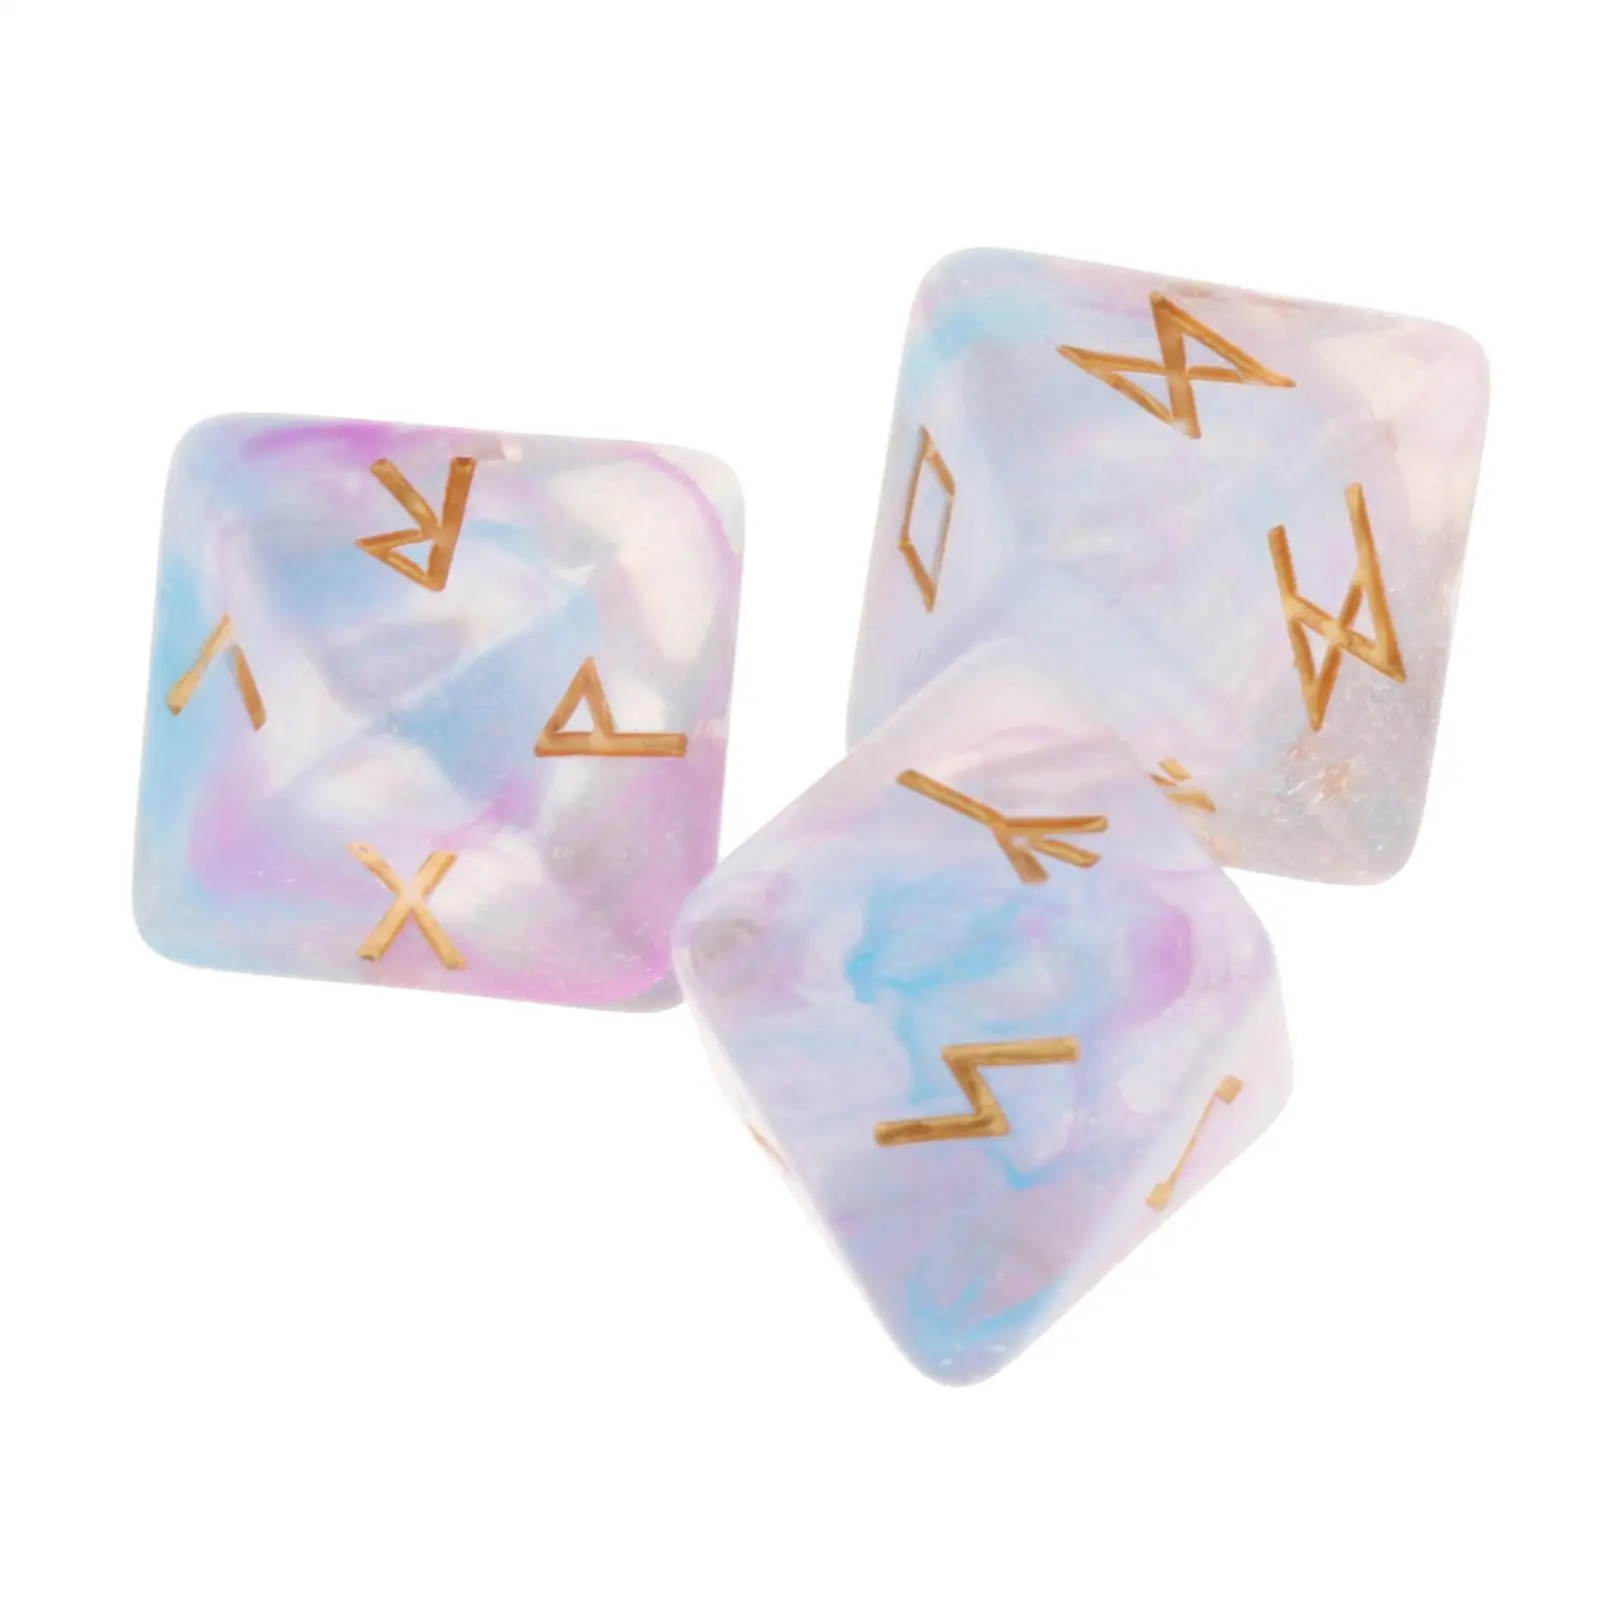 Starry Star Resin Tarot Divination Dice Good Polishing Effect for Game Dice